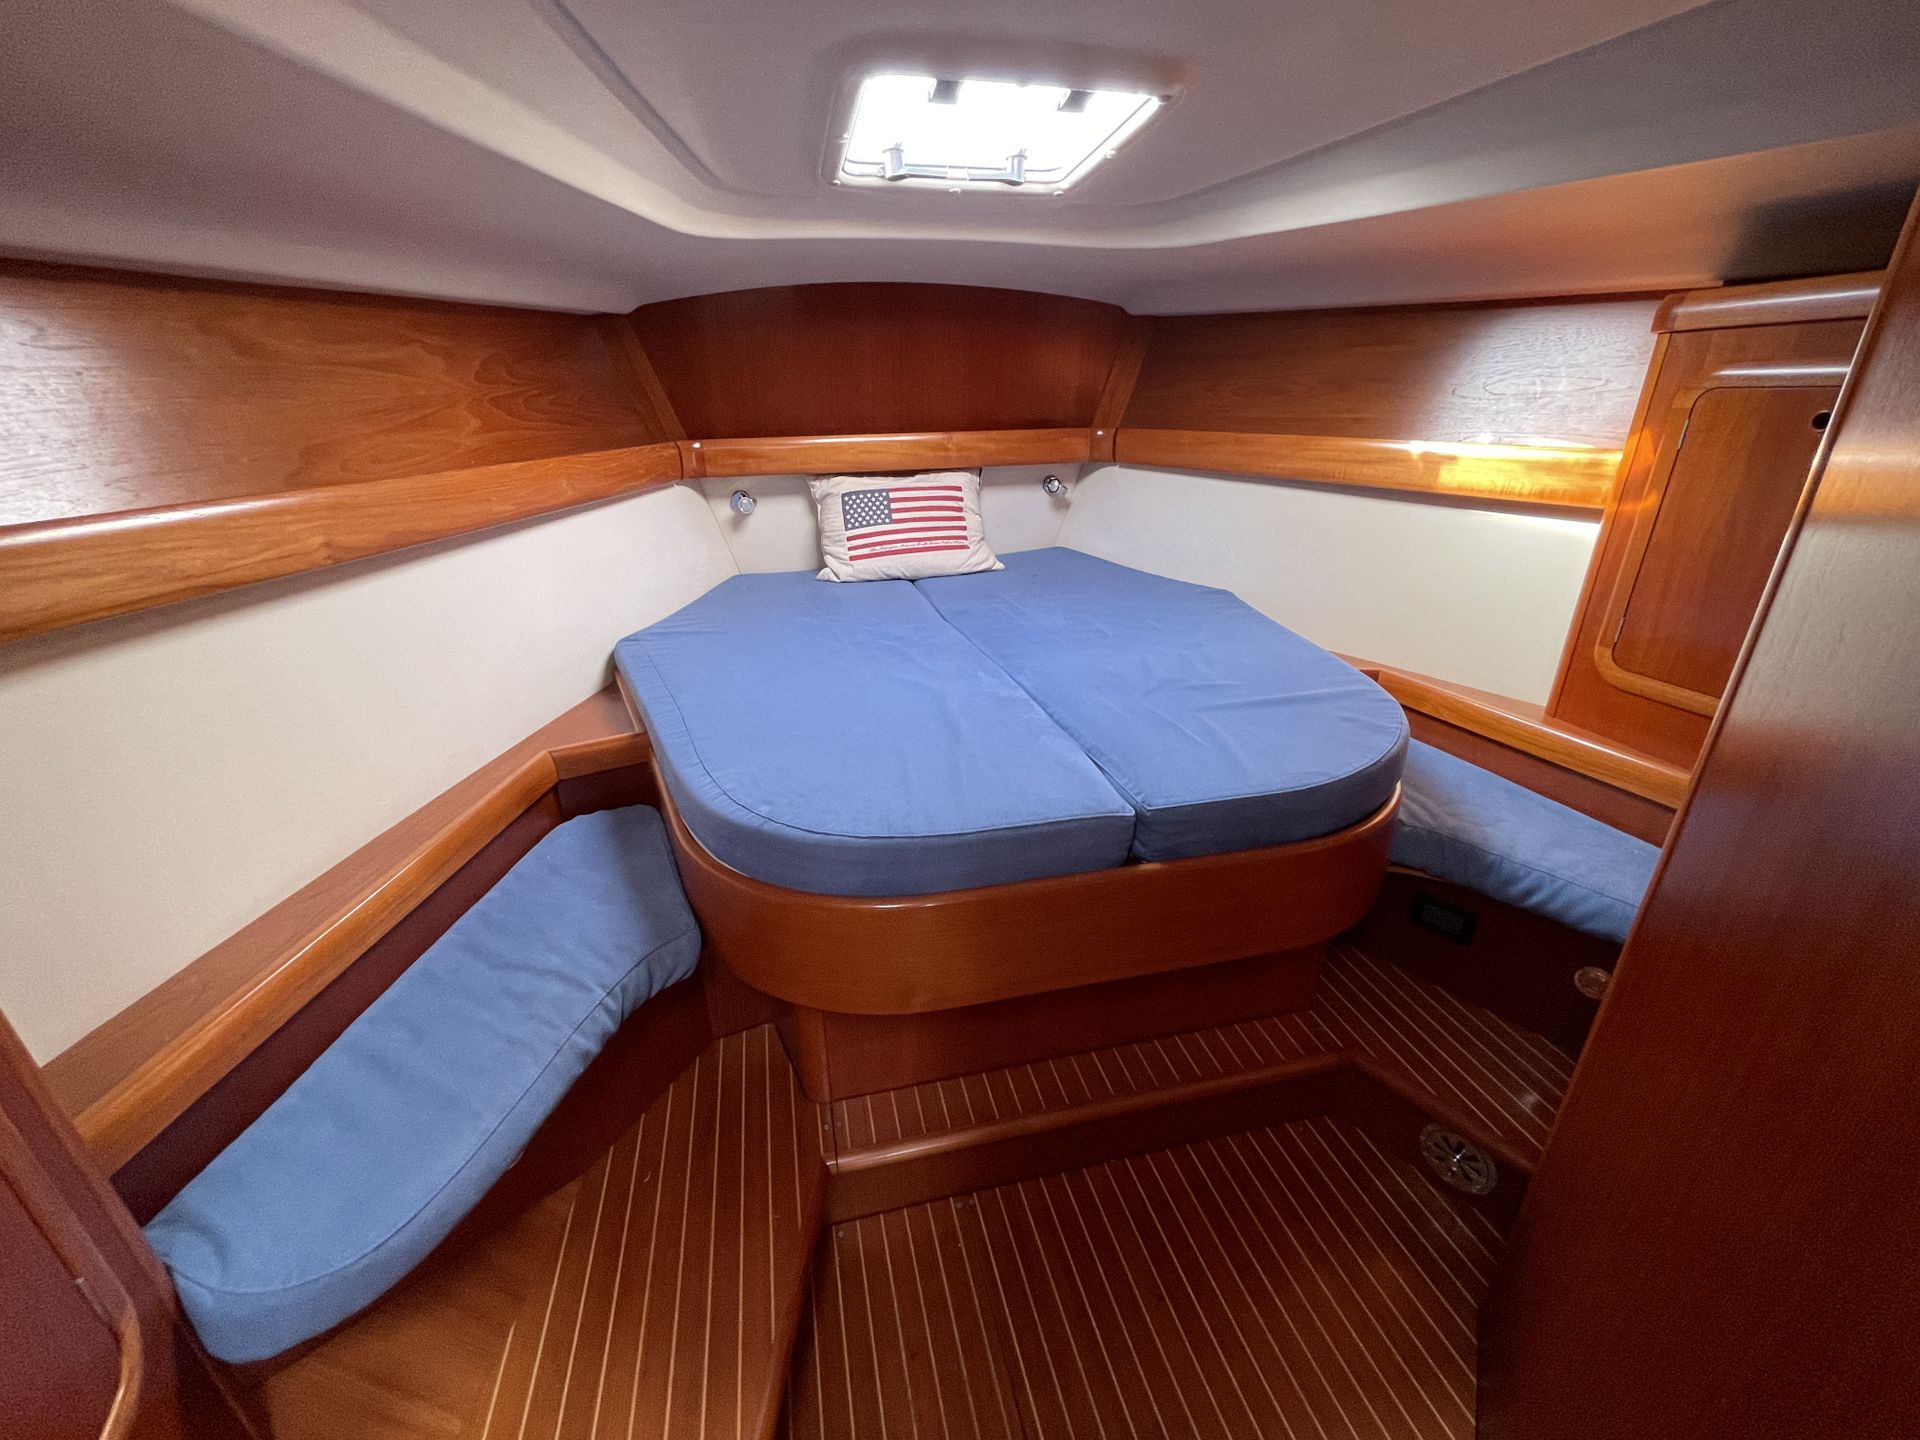 Grand Soleil 46.3 - 3 cabins - 2 owners and renovated teak deck #44